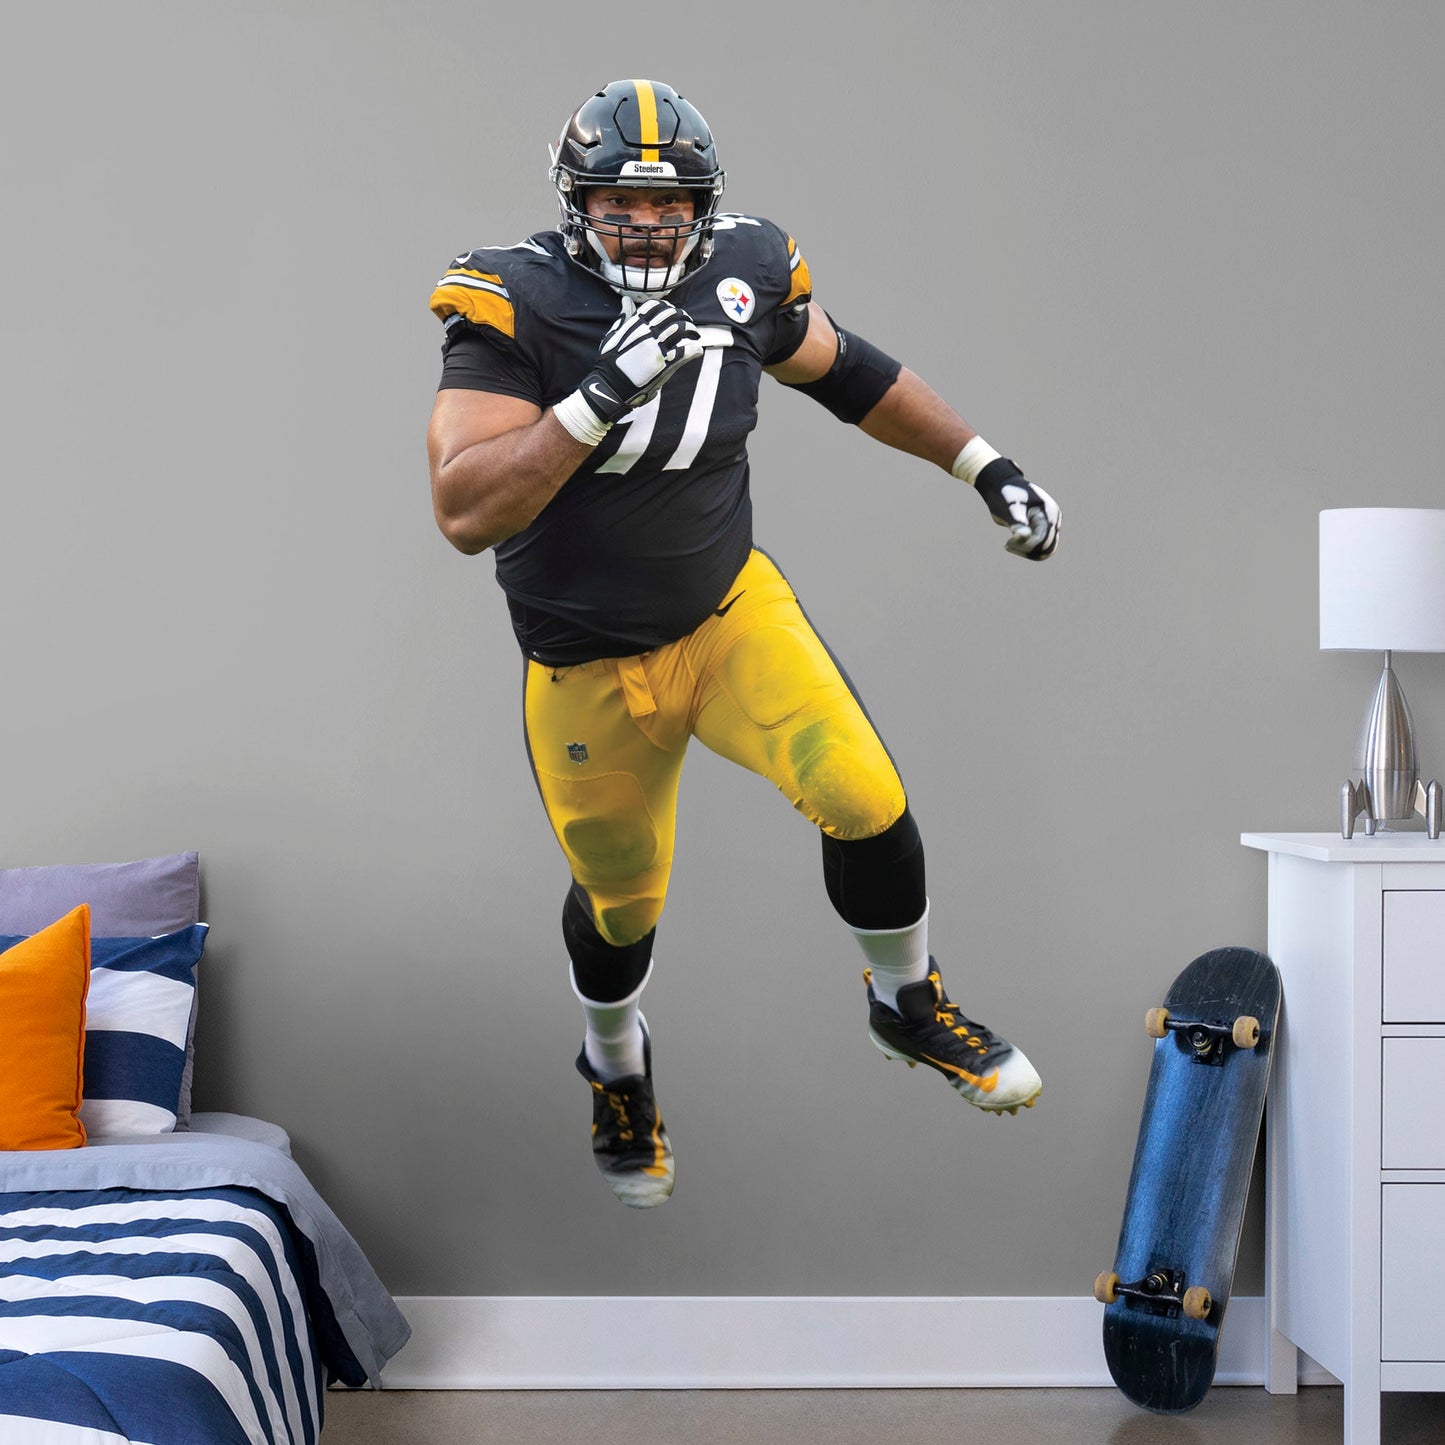 Pittsburgh Steelers: Cameron Heyward Running        - Officially Licensed NFL Removable Wall   Adhesive Decal